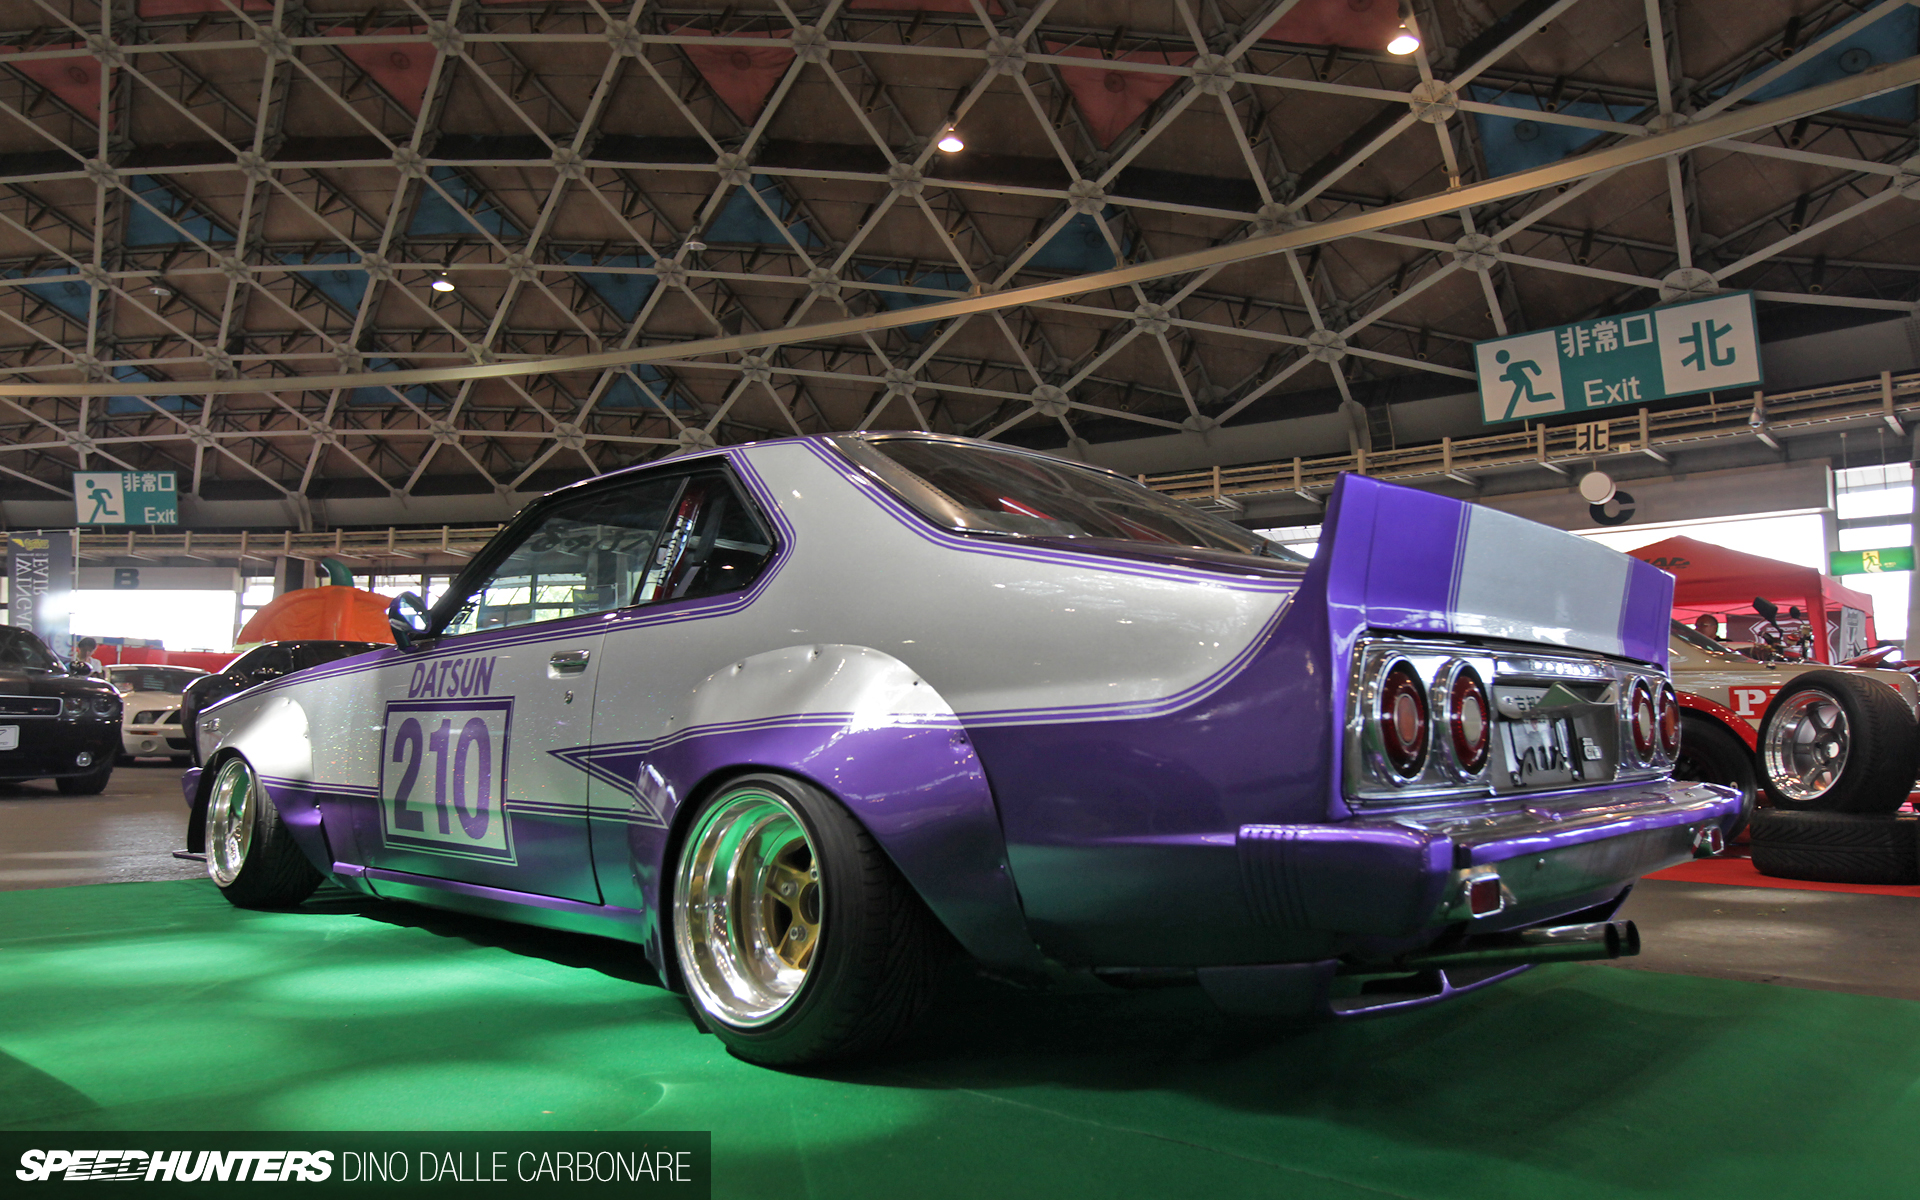 The Best Of The Rest At Auto Legends - Speedhunters